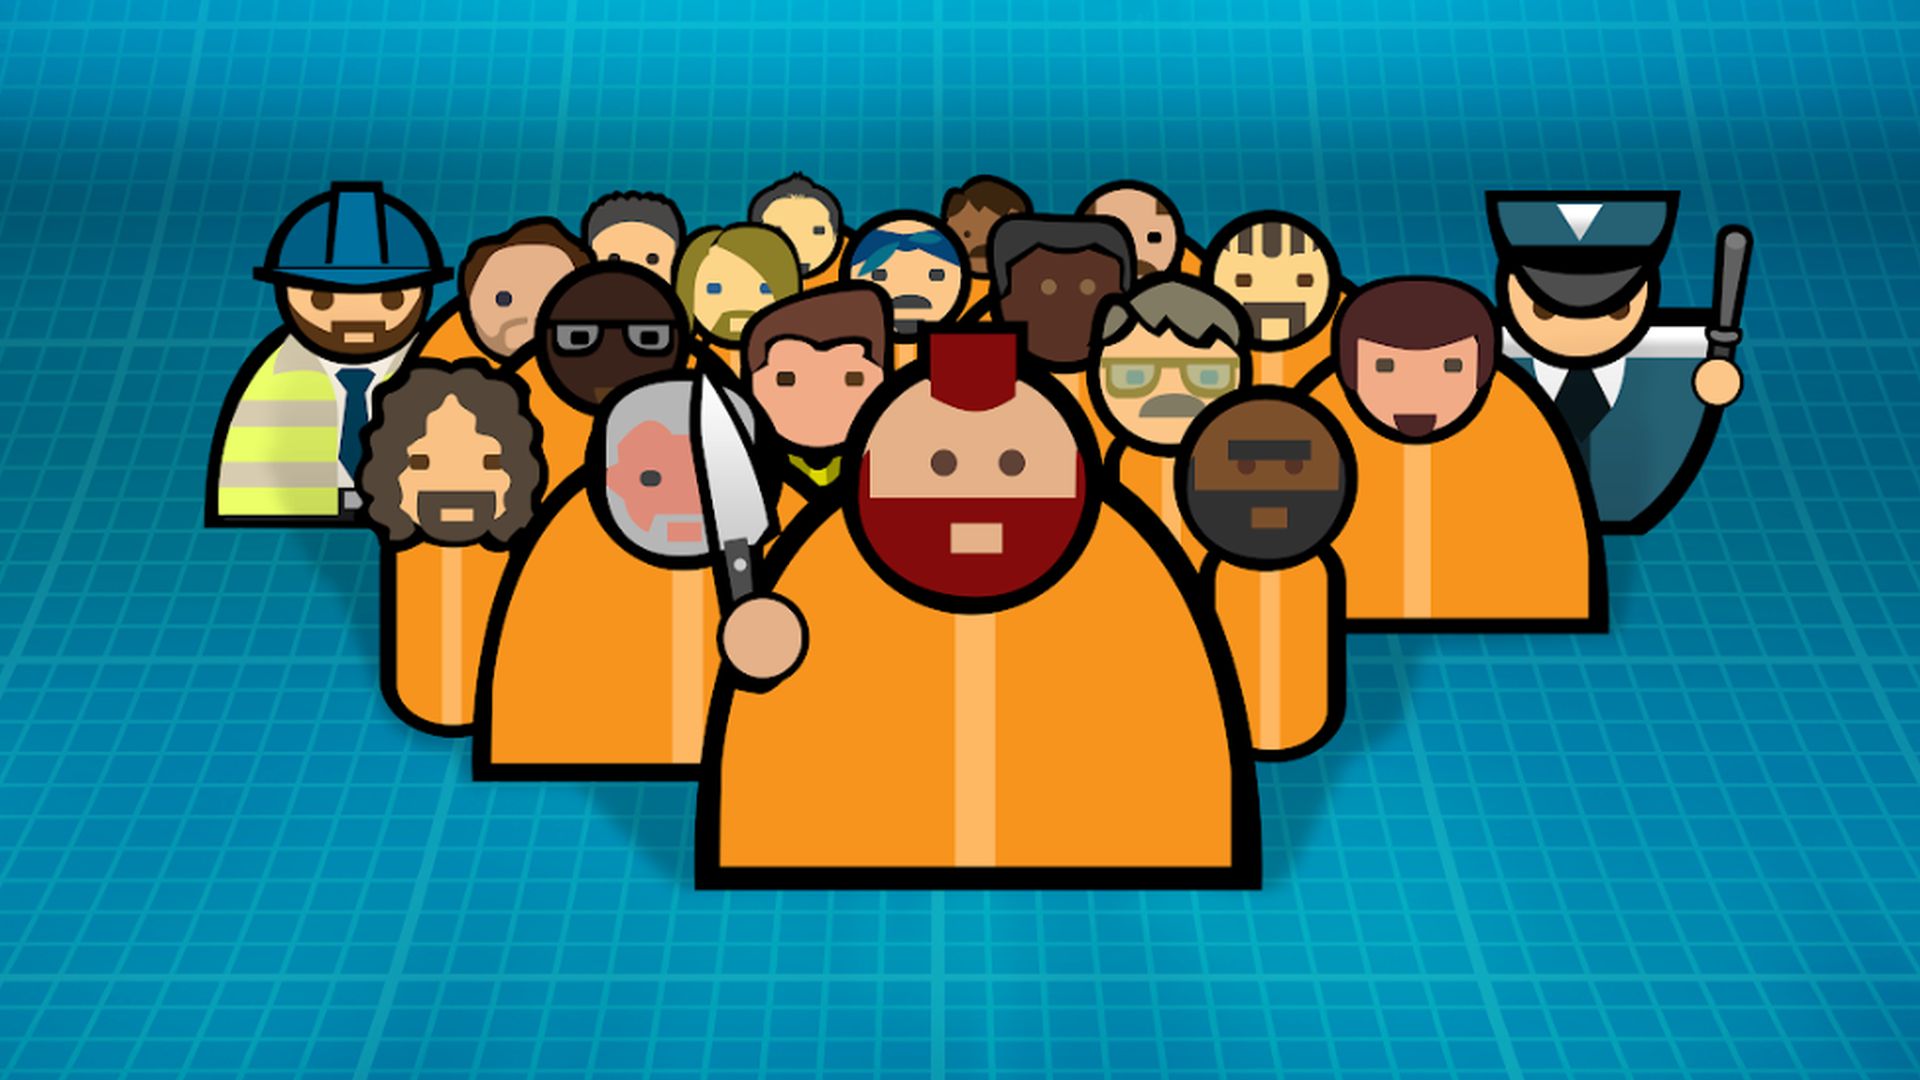 Prison Architect is five years old, so celebrate by playing the original version | PCGamesN